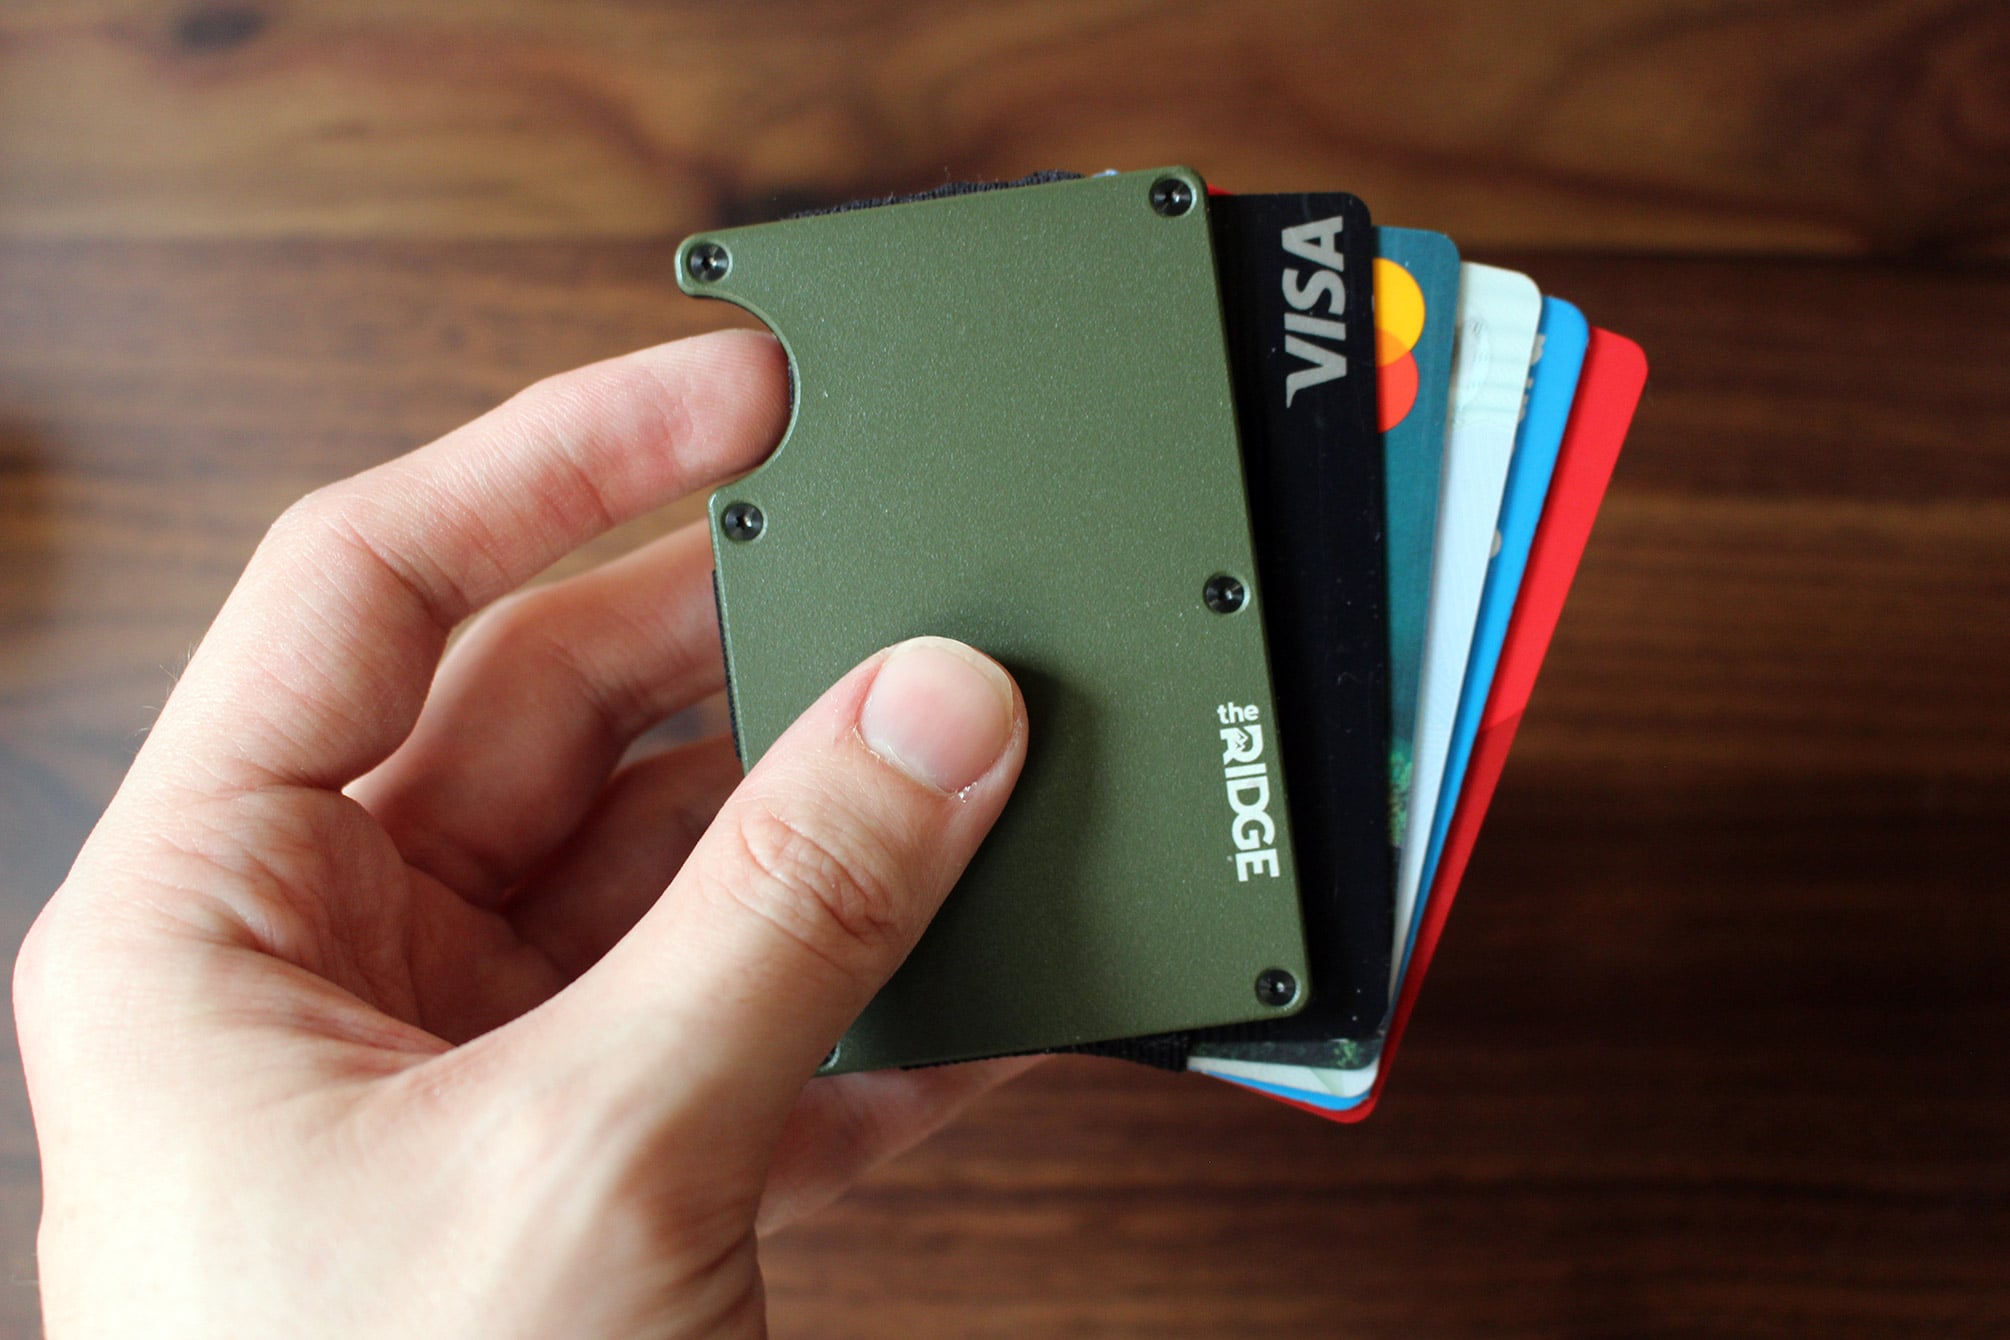 Can You Put the Ridge Wallet in Your Back Pocket?